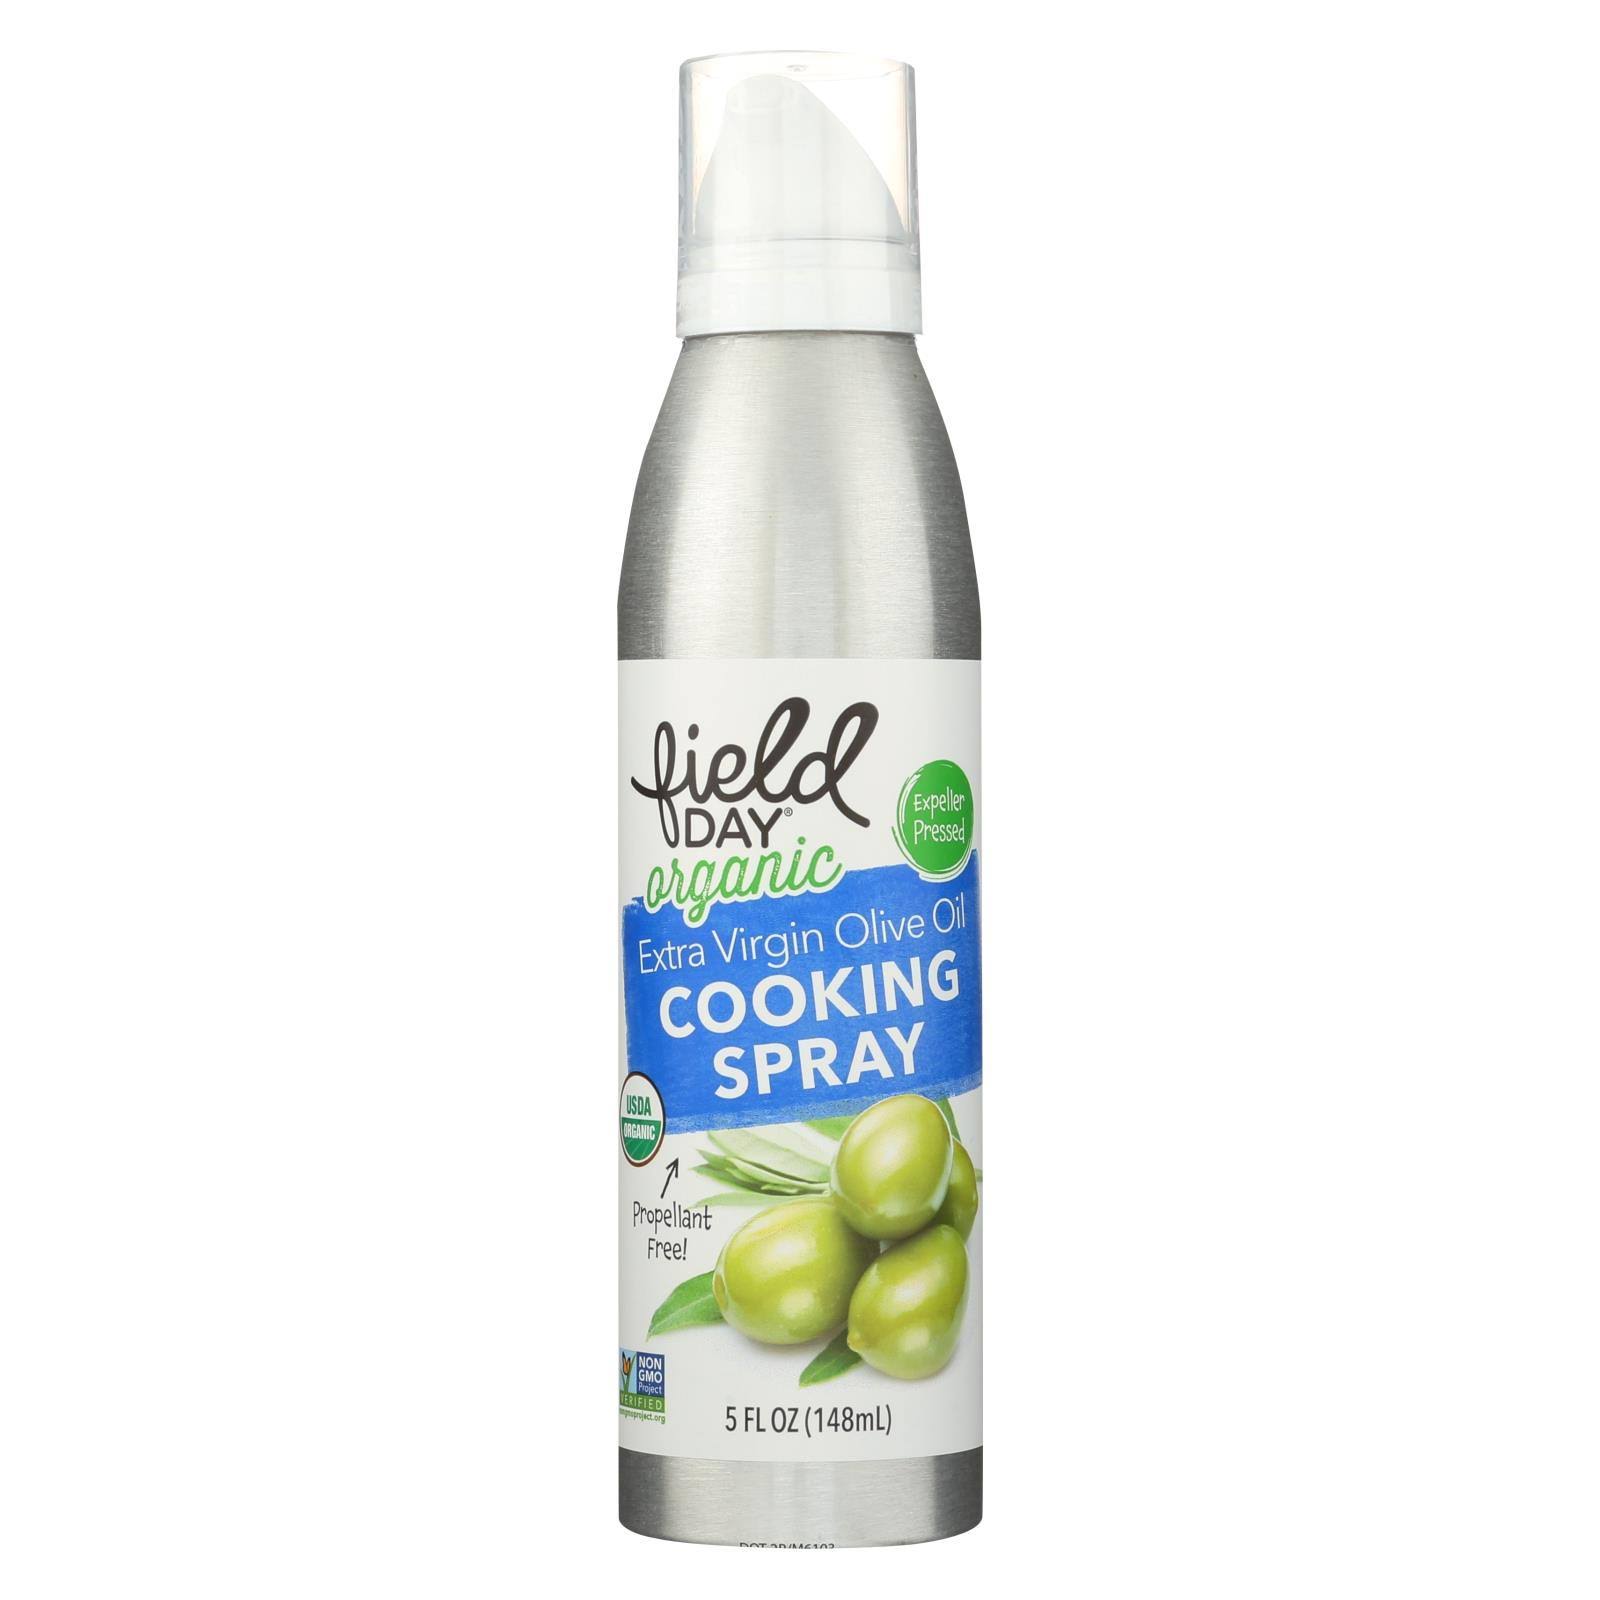 Field Day Organic Extra Virgin Olive Oil Cooking Spray - Cooking Spray - Case Of 6 - 5 Fl Oz.